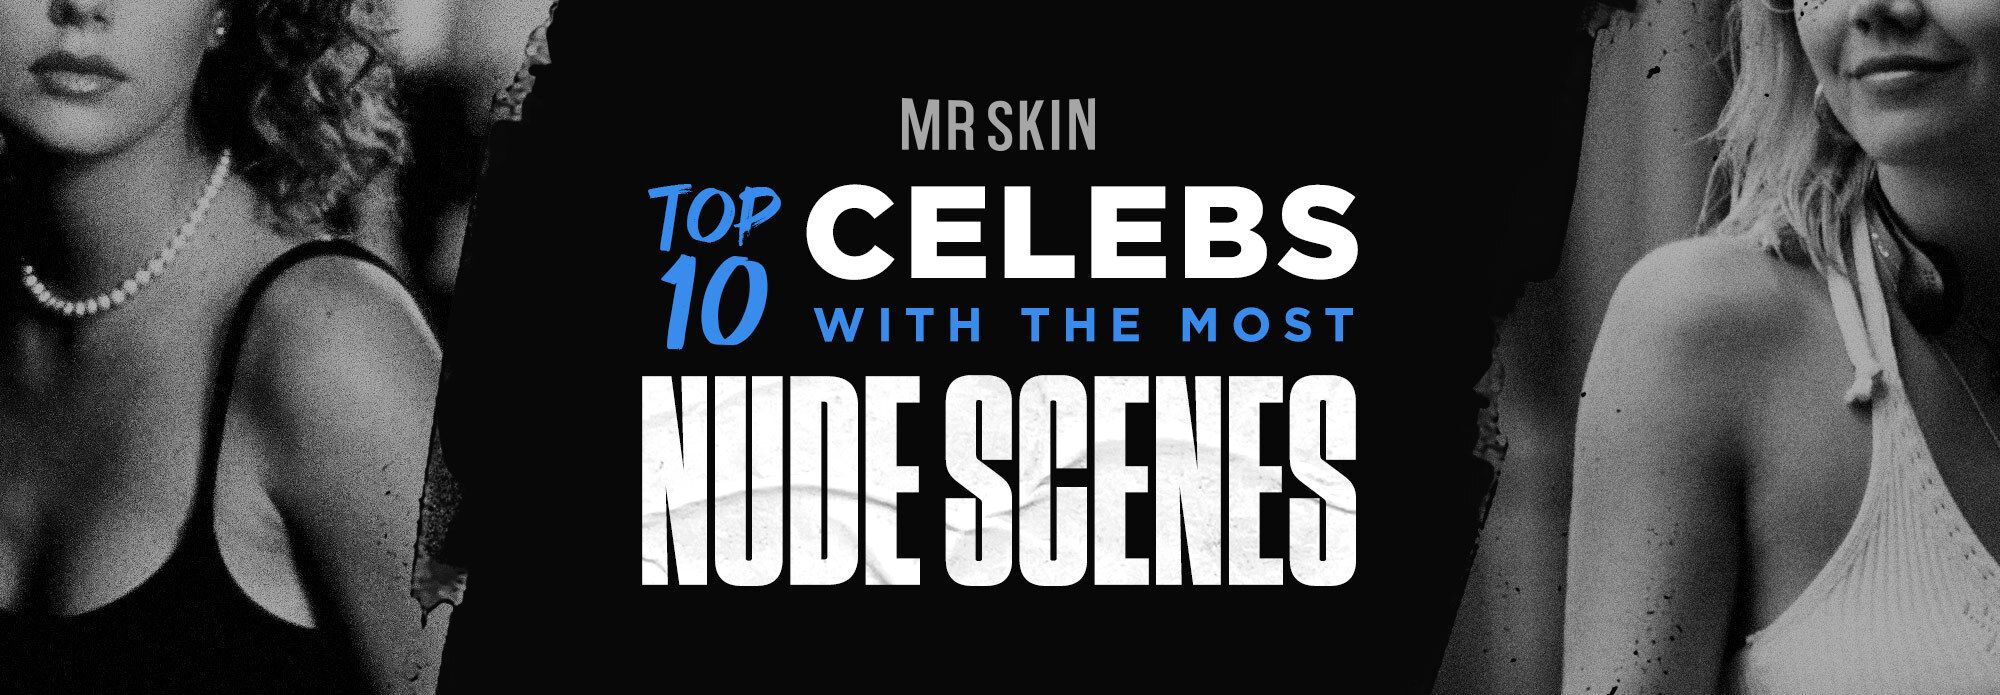 Top 10 Celebs with Most Nude Scenes